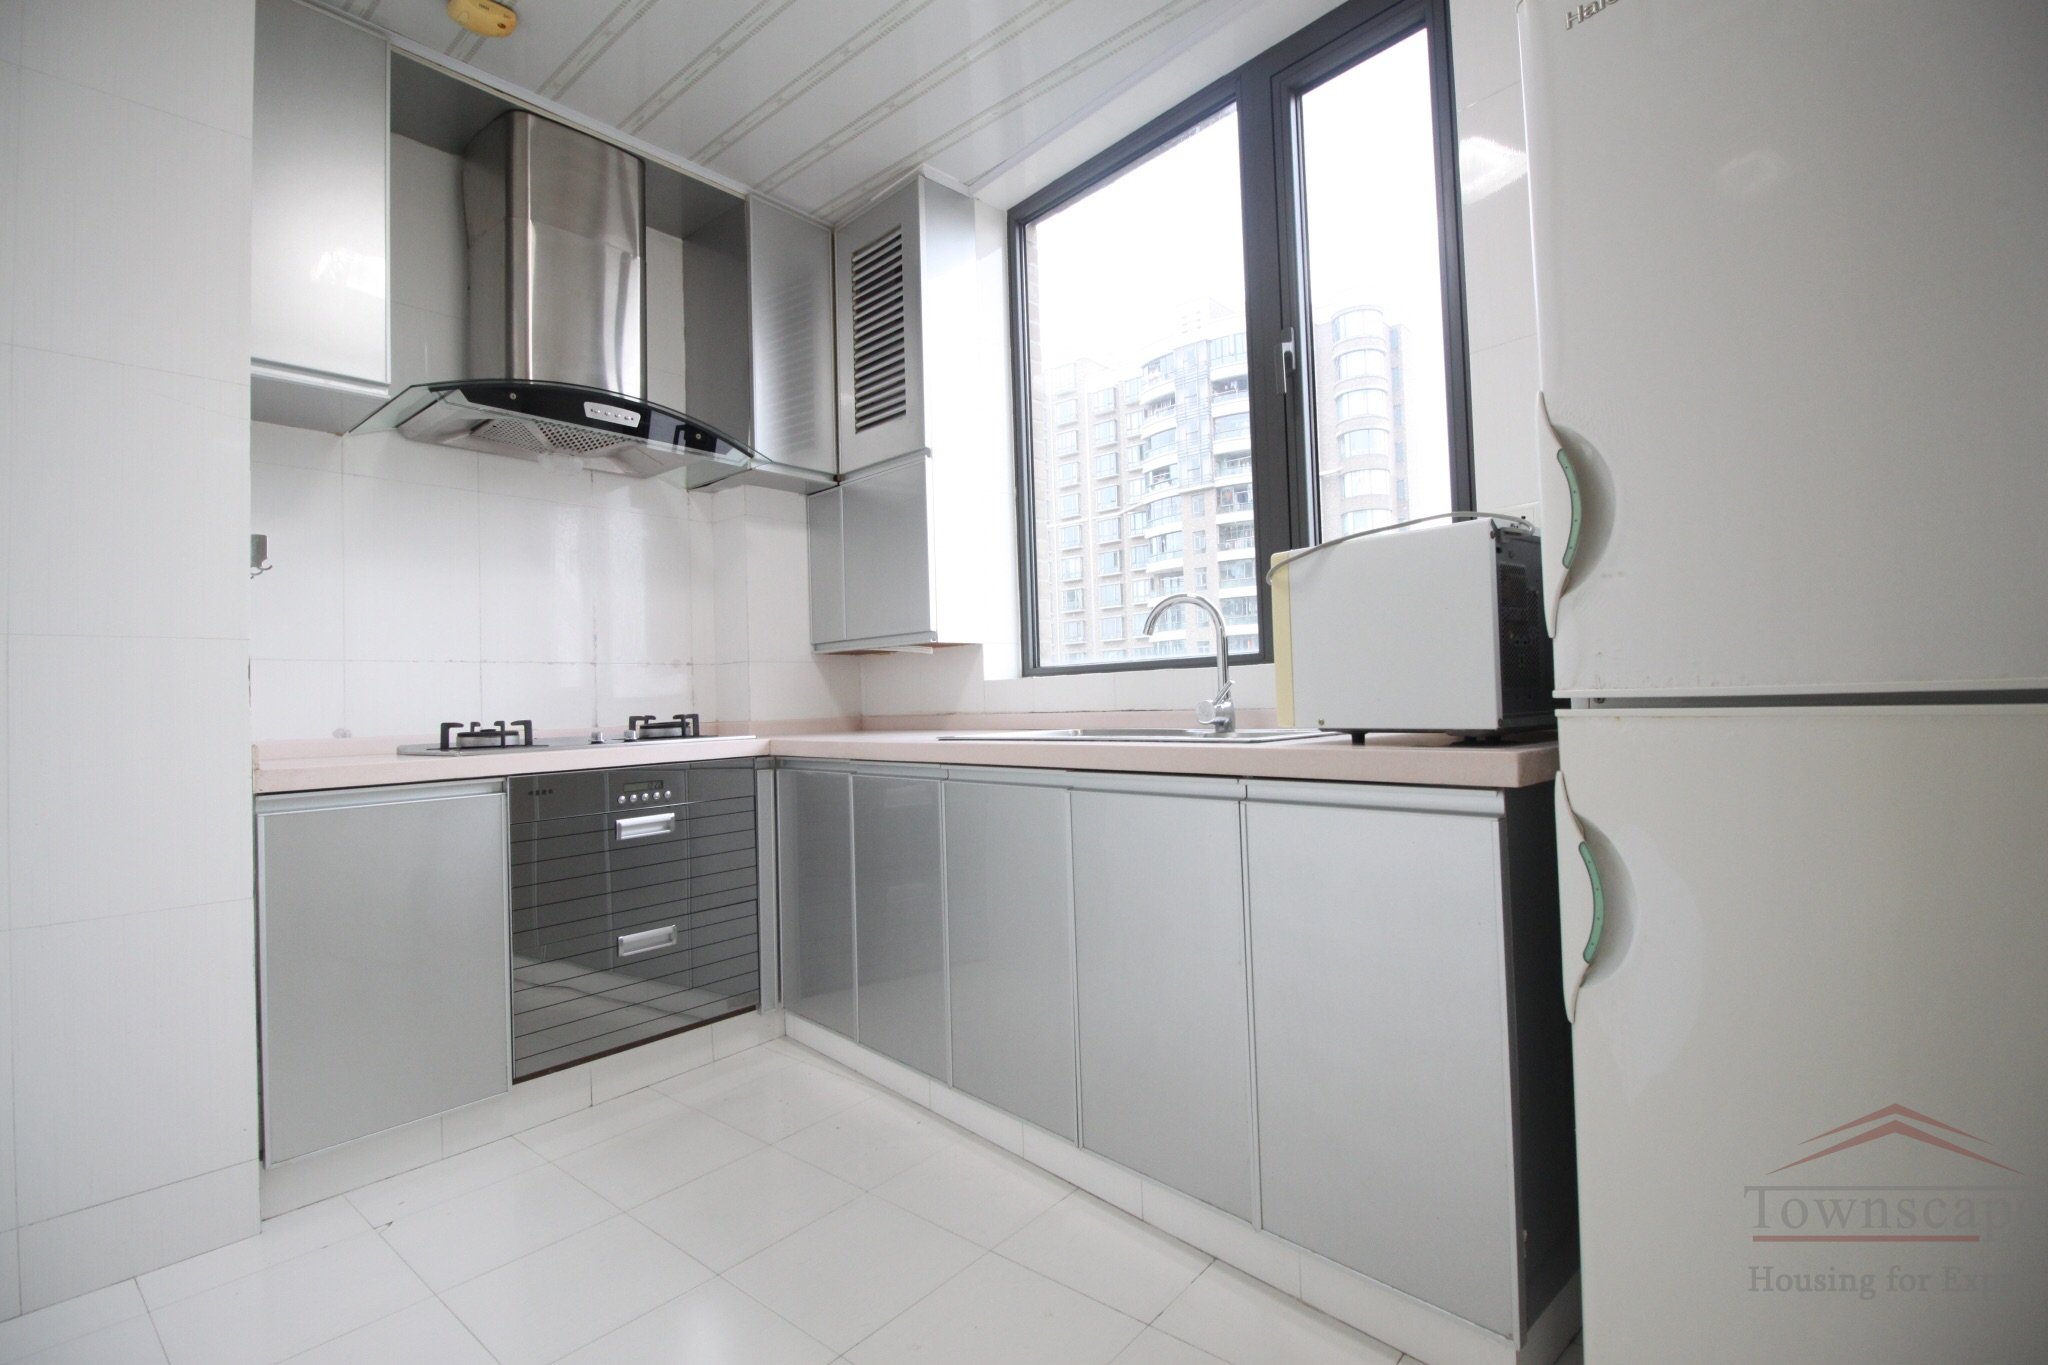 mingshen road apartment Sunny 3BR Apartment for rent in East Lujiazui, next to Metro station Minsheng Road, Line 6